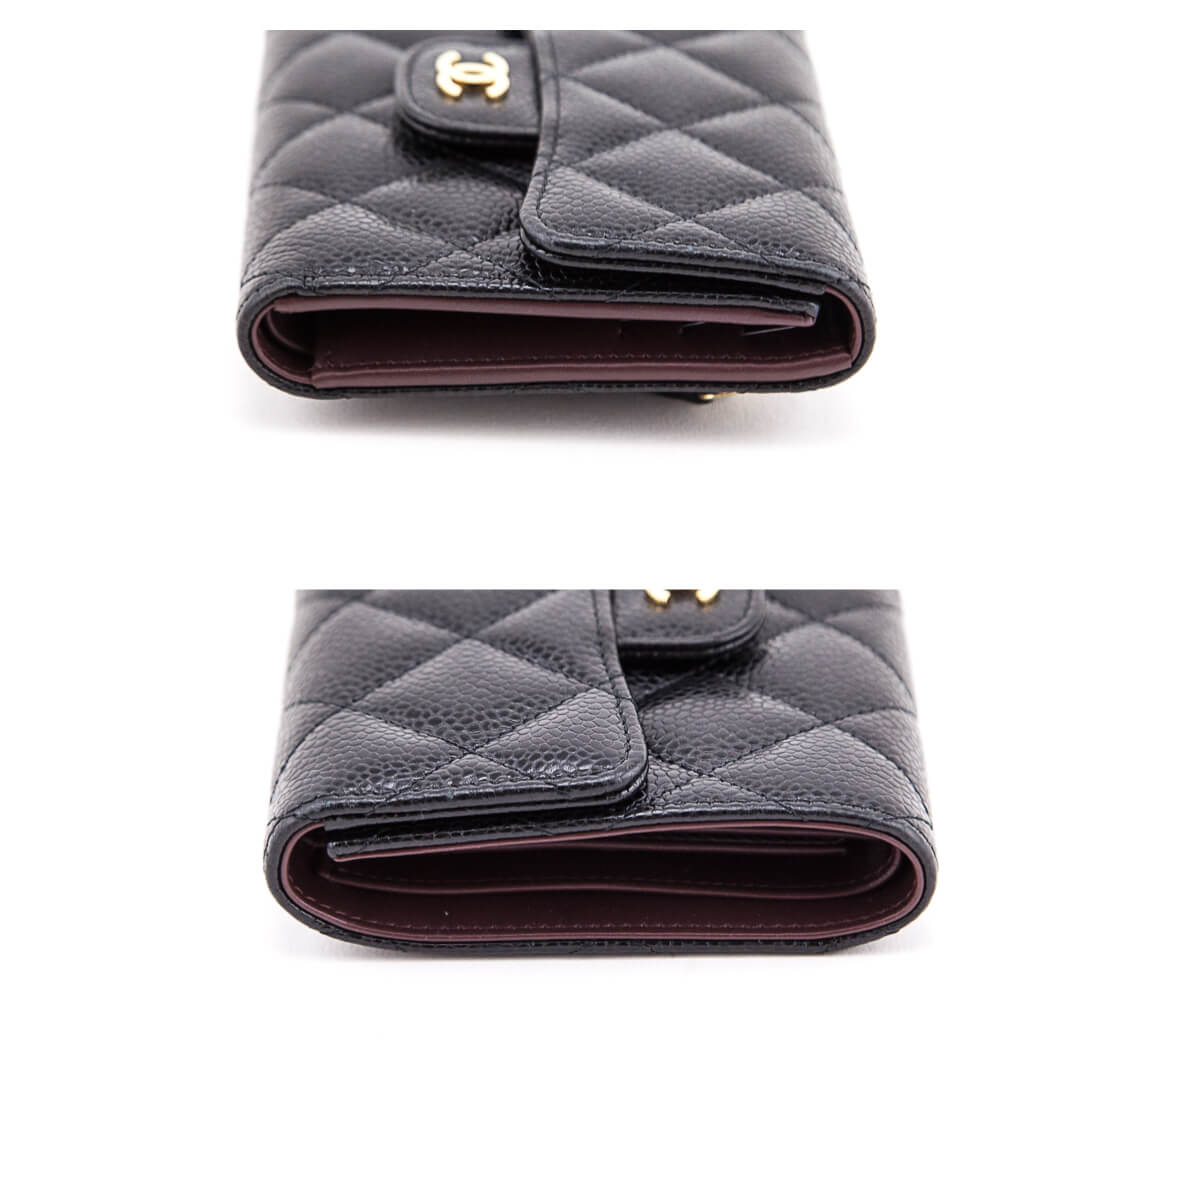 Chanel Black Quilted Caviar Classic Small Flap Wallet - Chanel Canada